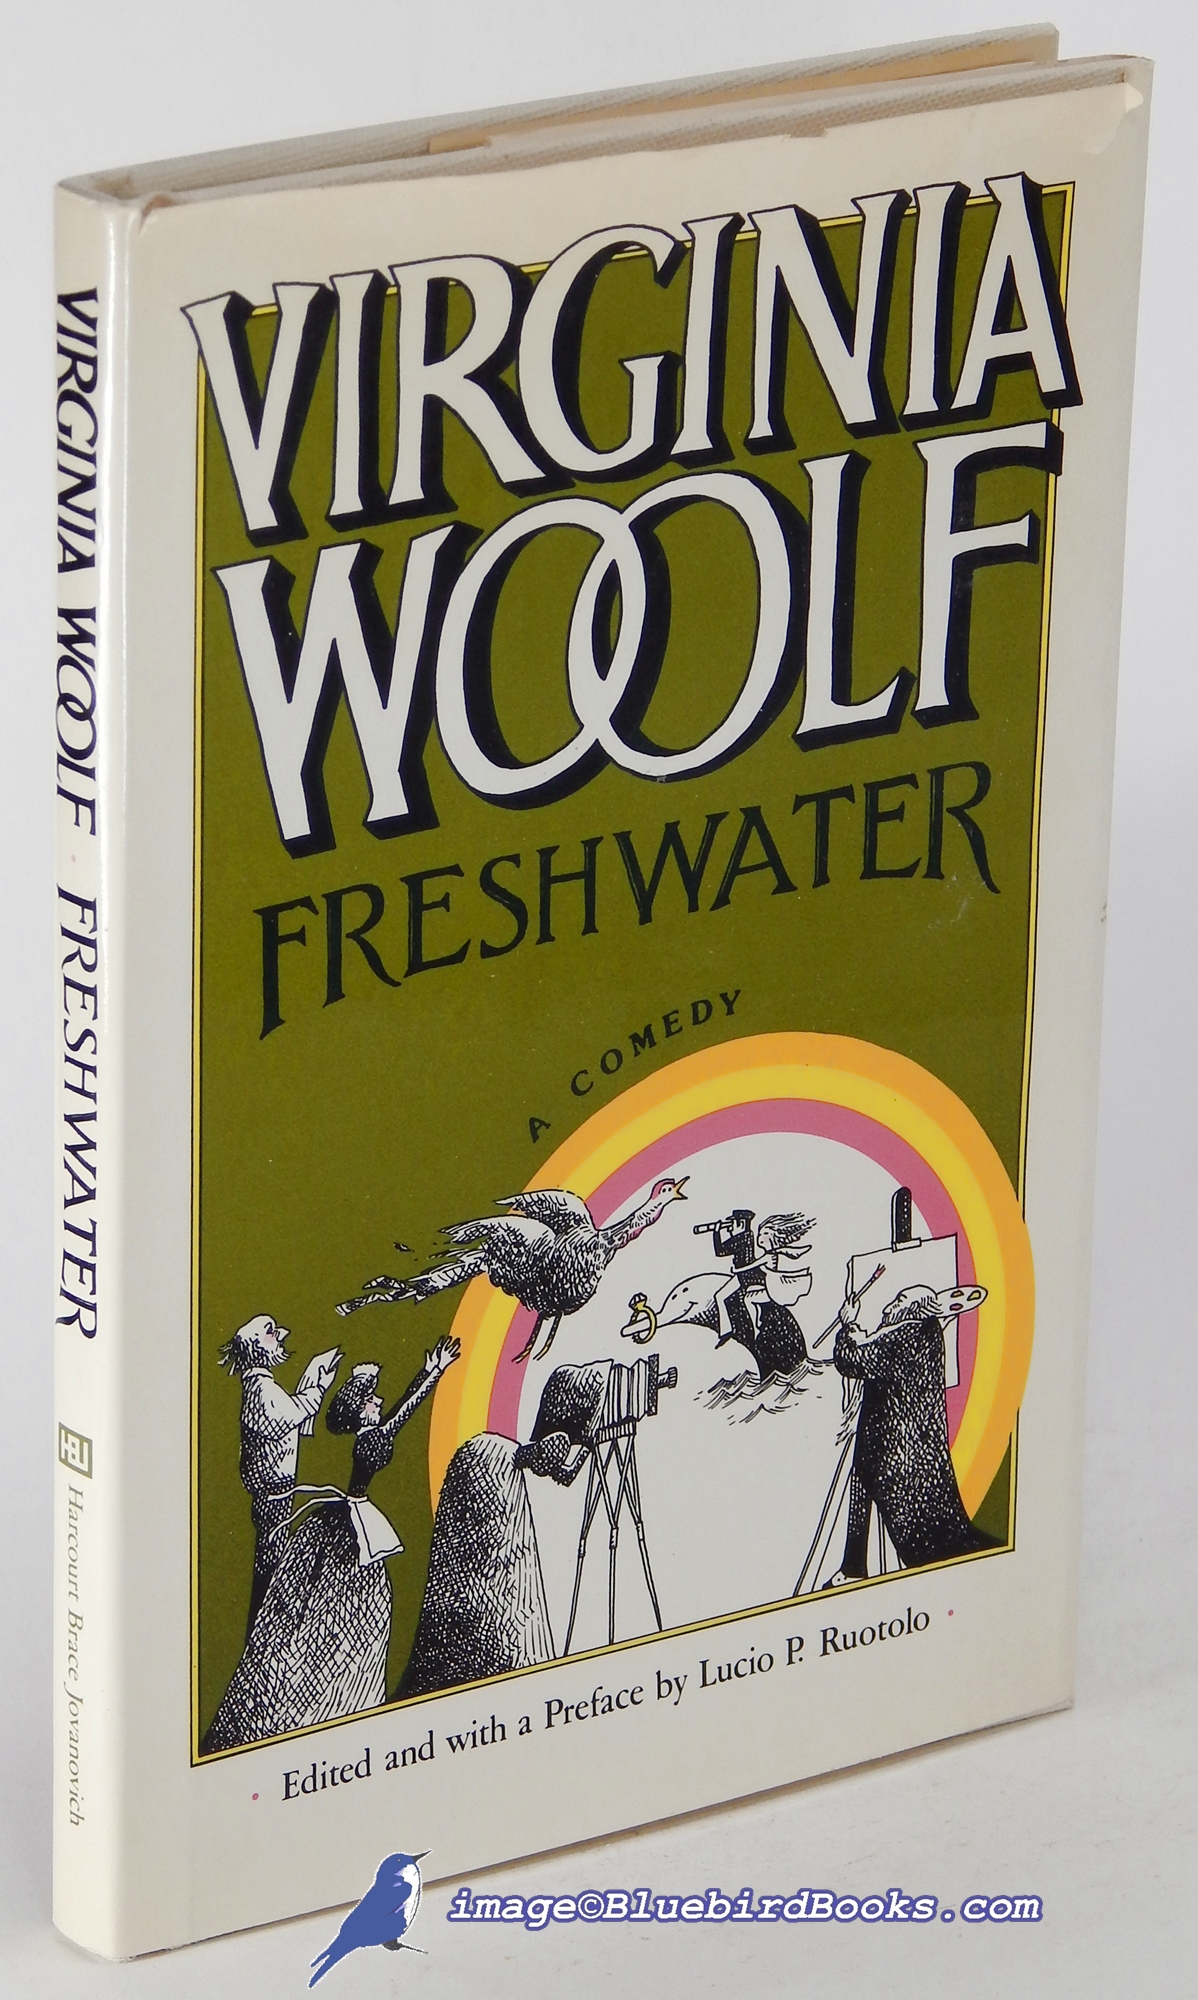 WOOLF, VIRGINIA - Freshwater: A Comedy